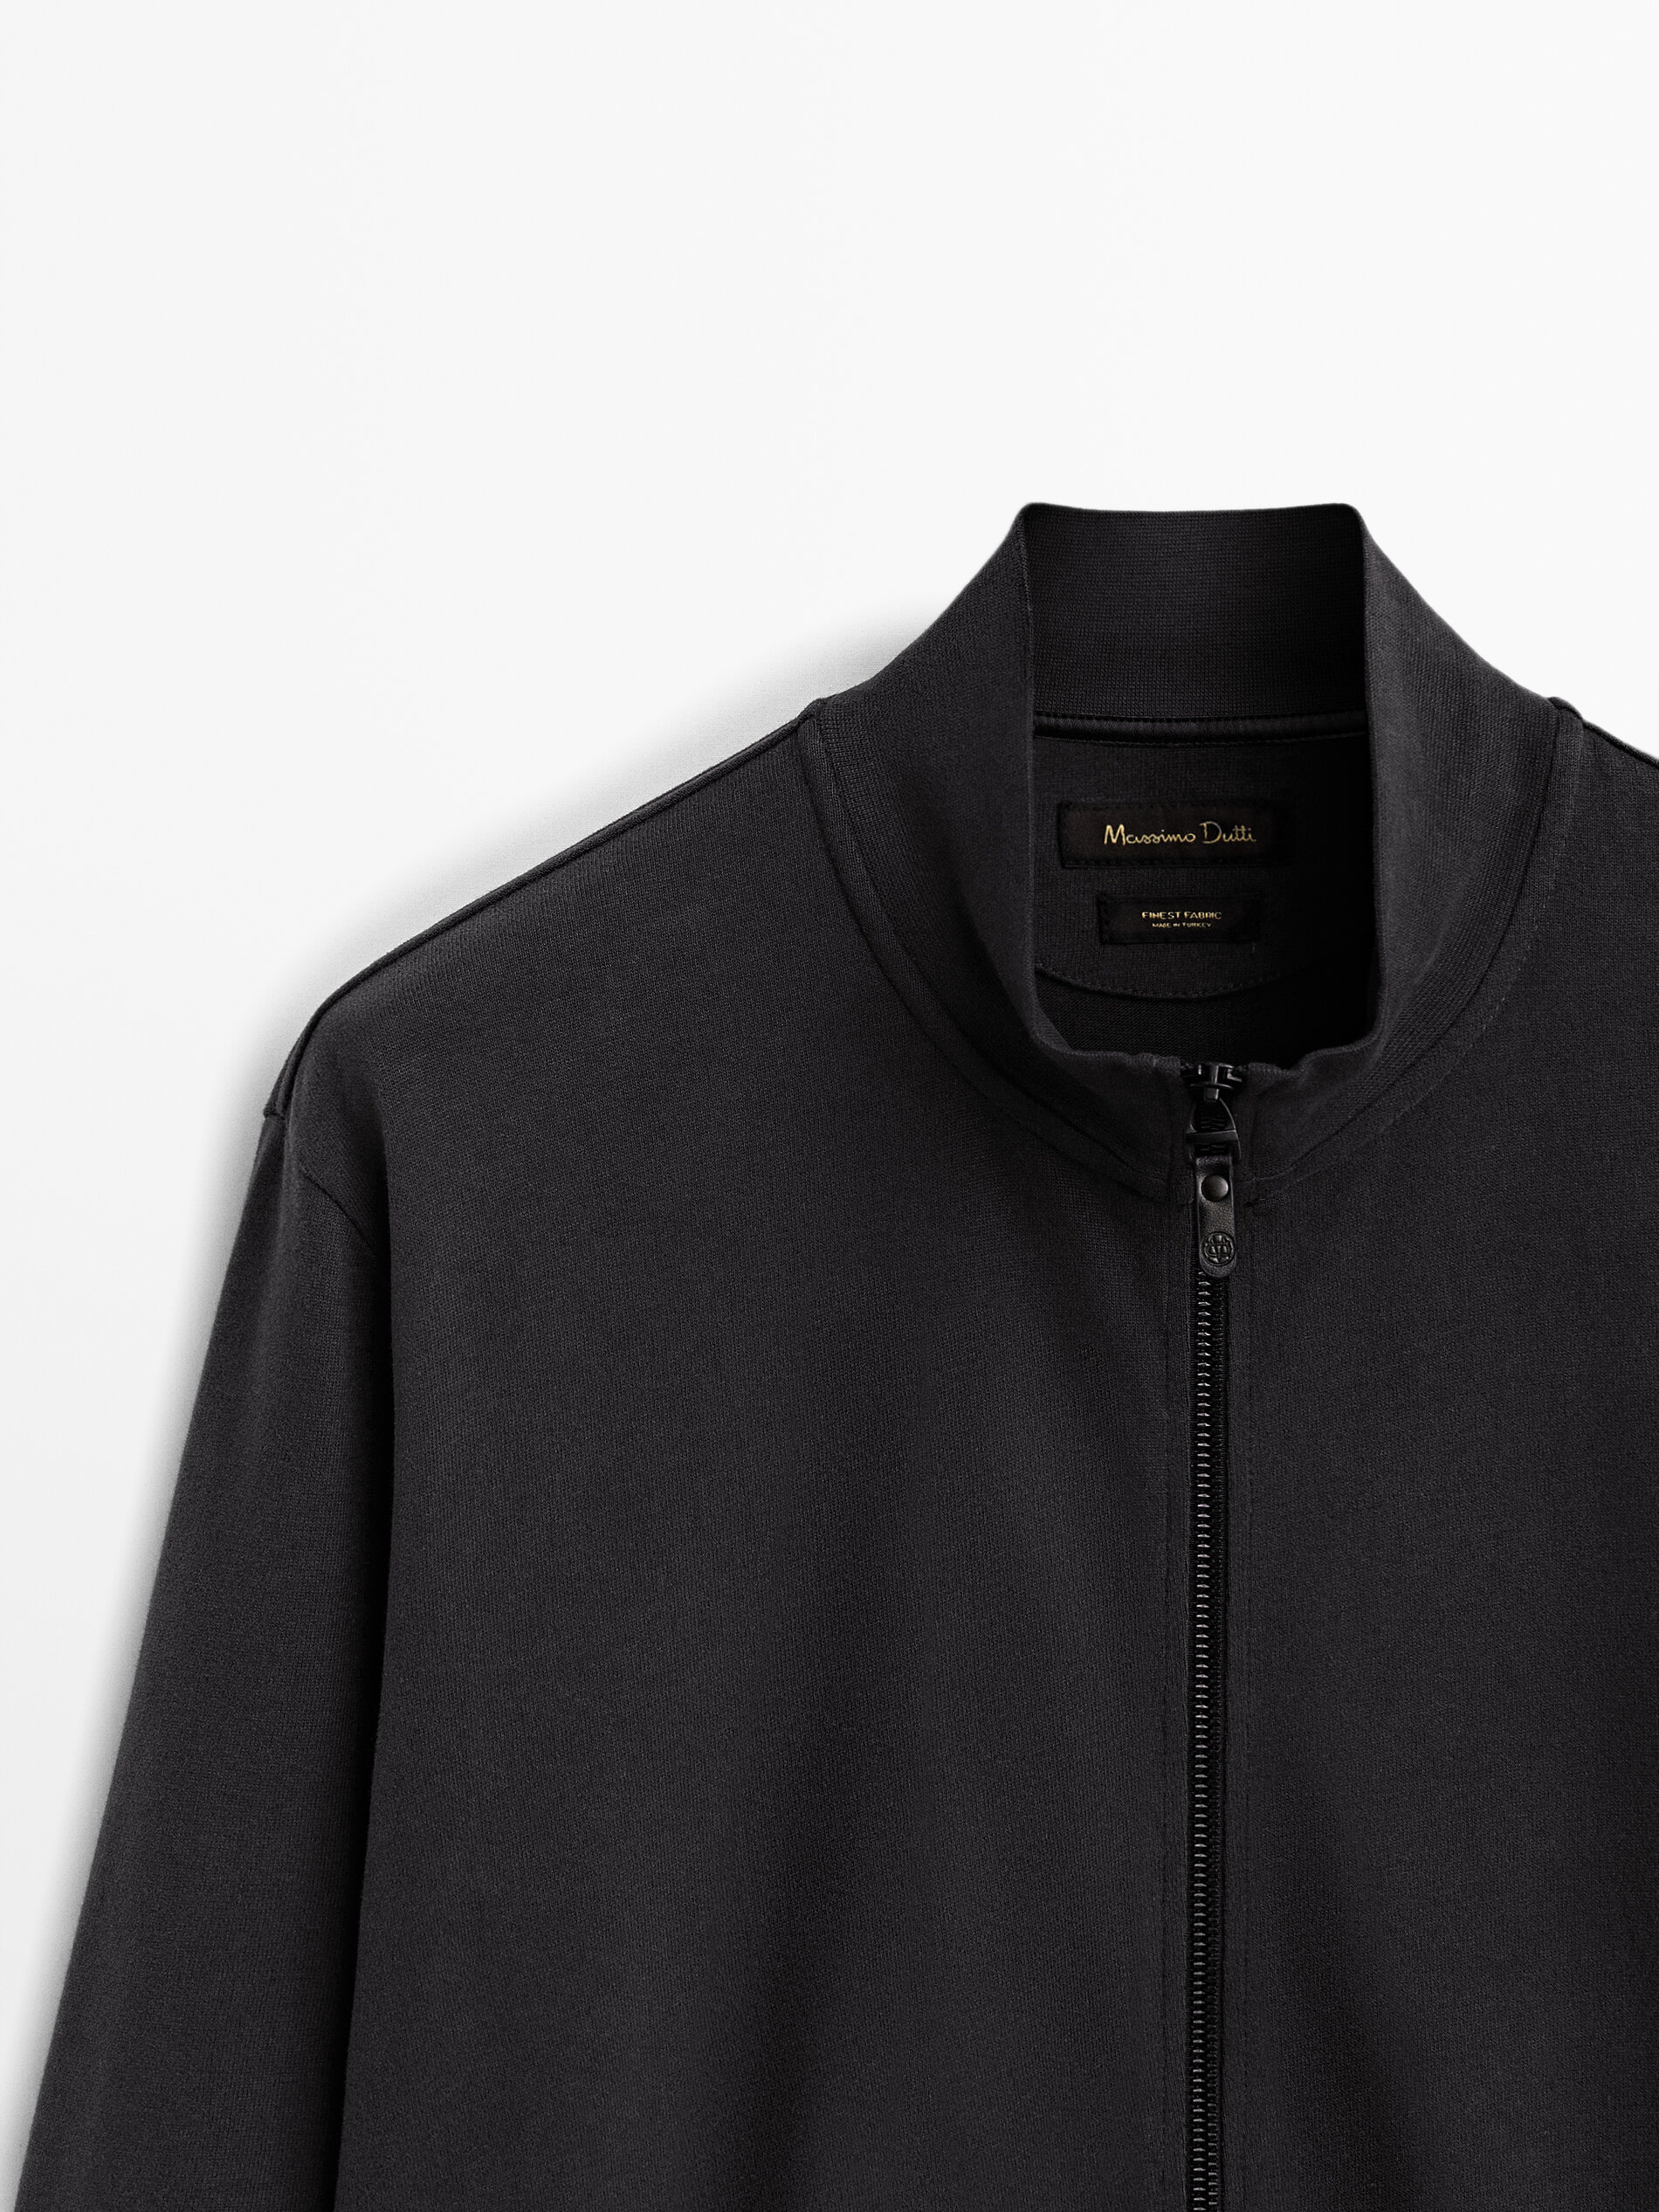 Massimo Dutti - Cotton zip-up jacket with high neck